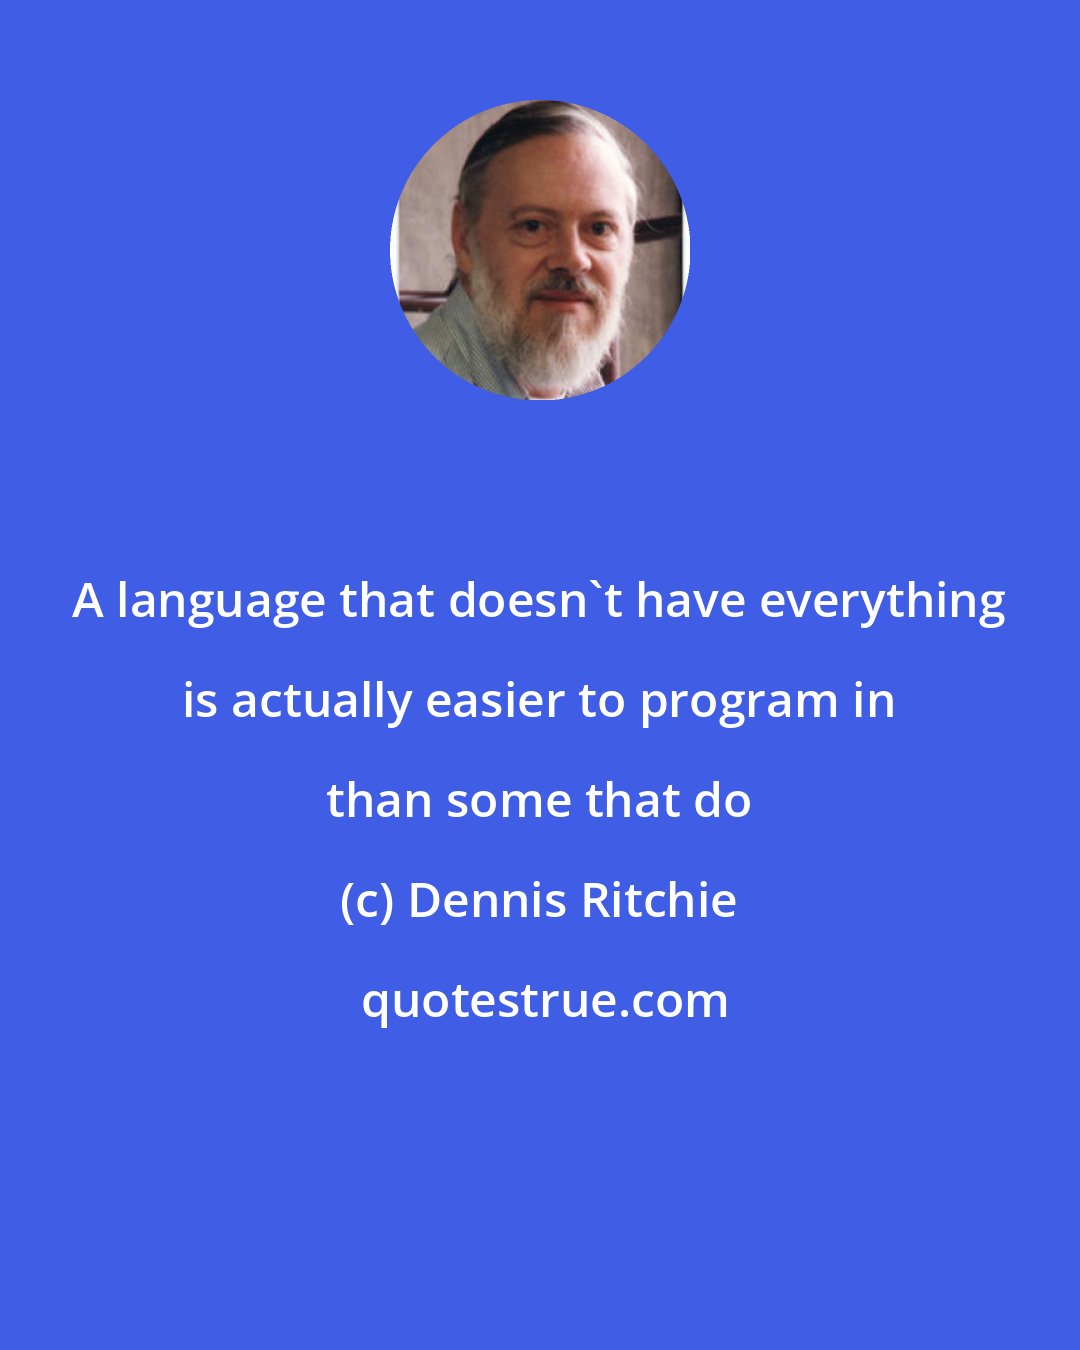 Dennis Ritchie: A language that doesn't have everything is actually easier to program in than some that do